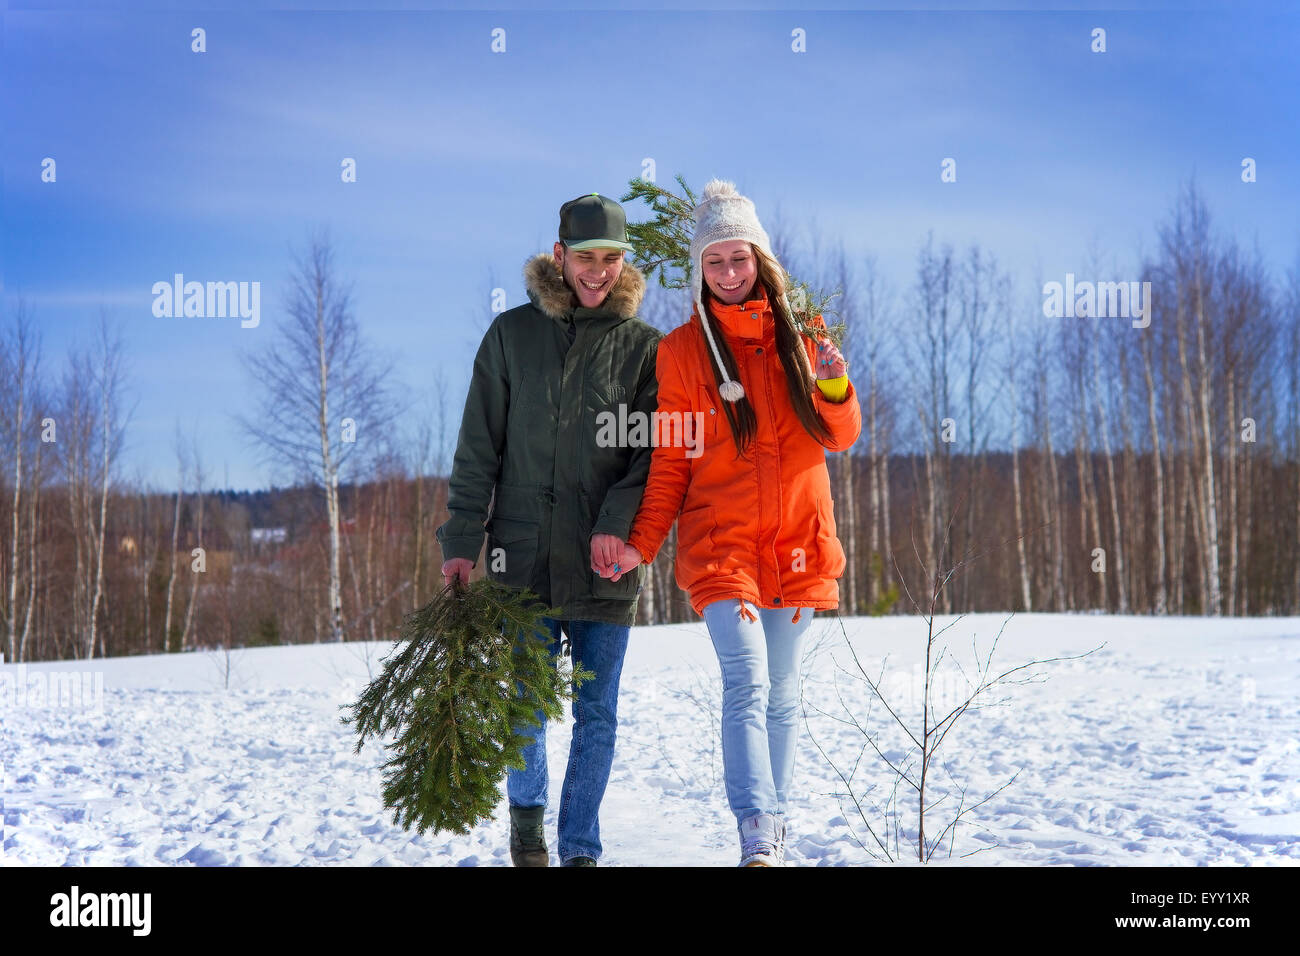 Caucasian couple carrying tree branch in snowy field Stock Photo